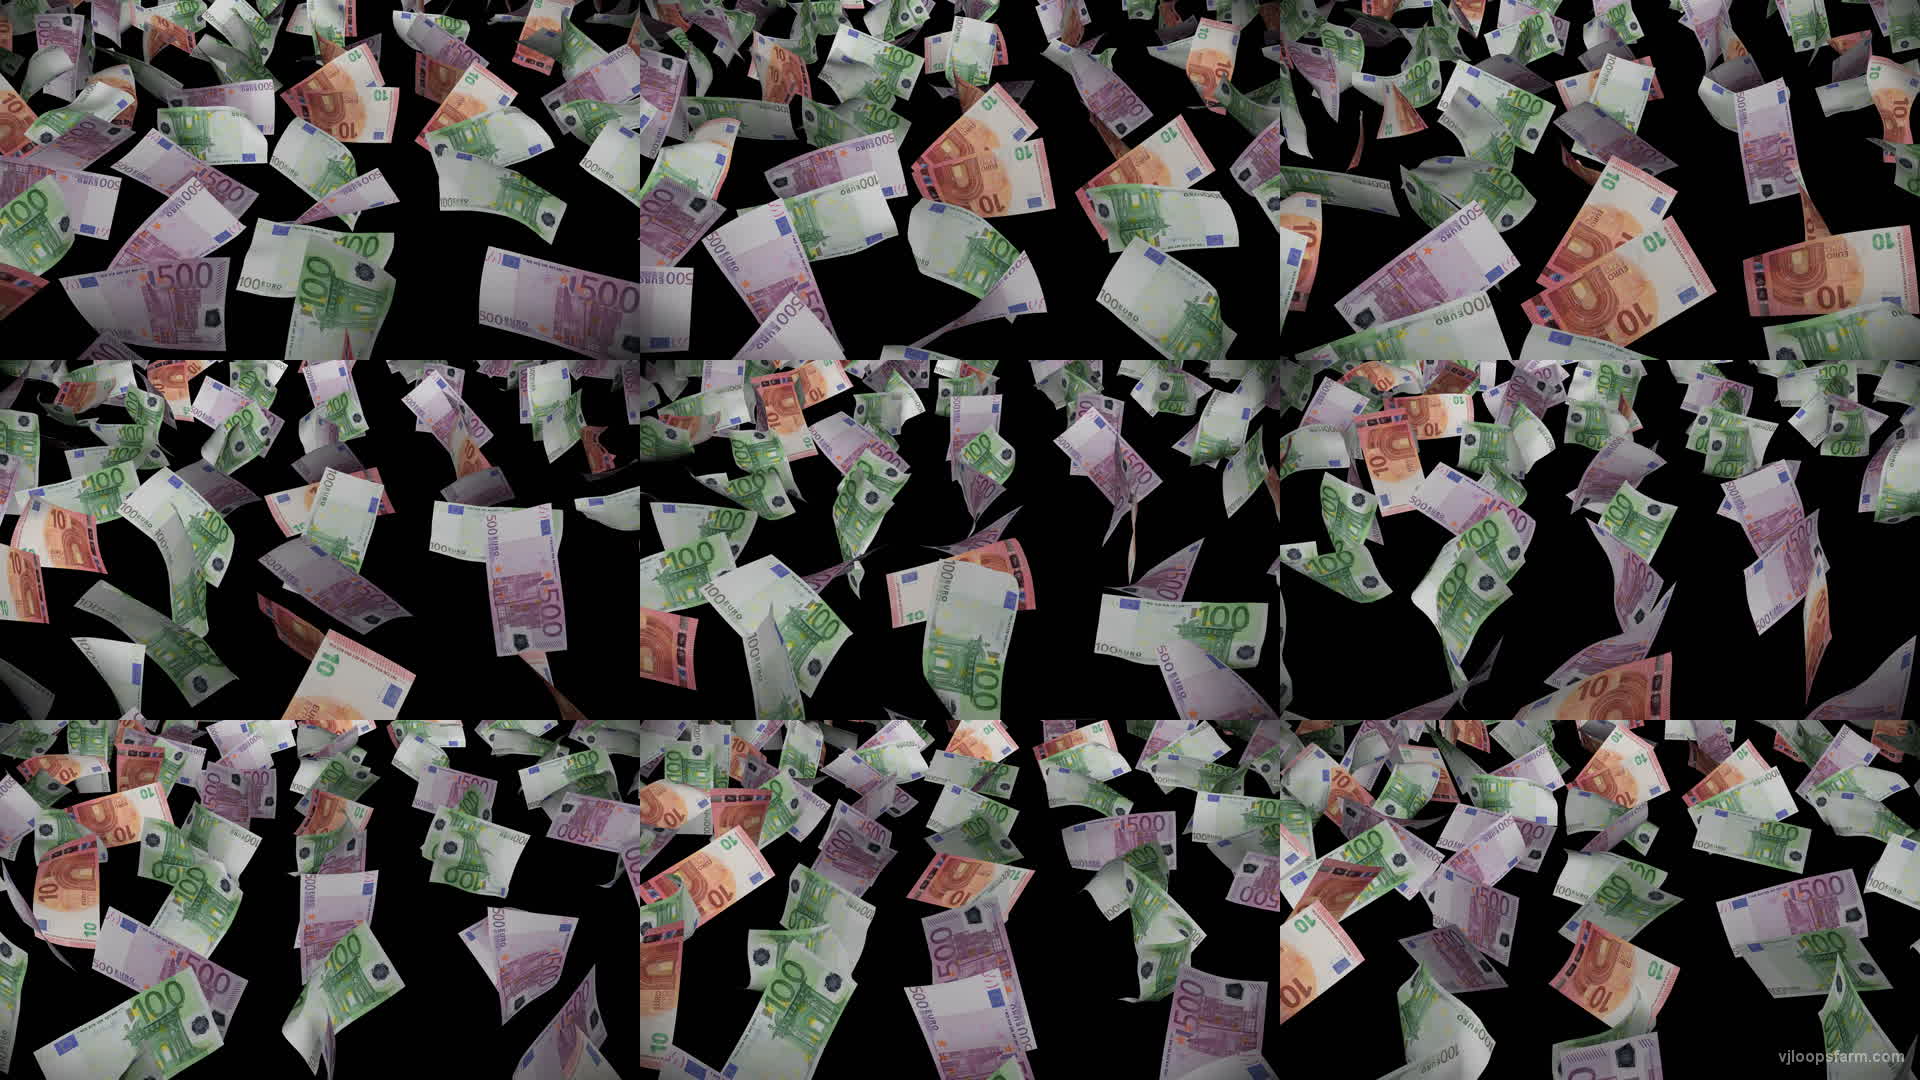 Euro paper money bills currency flow down on black background